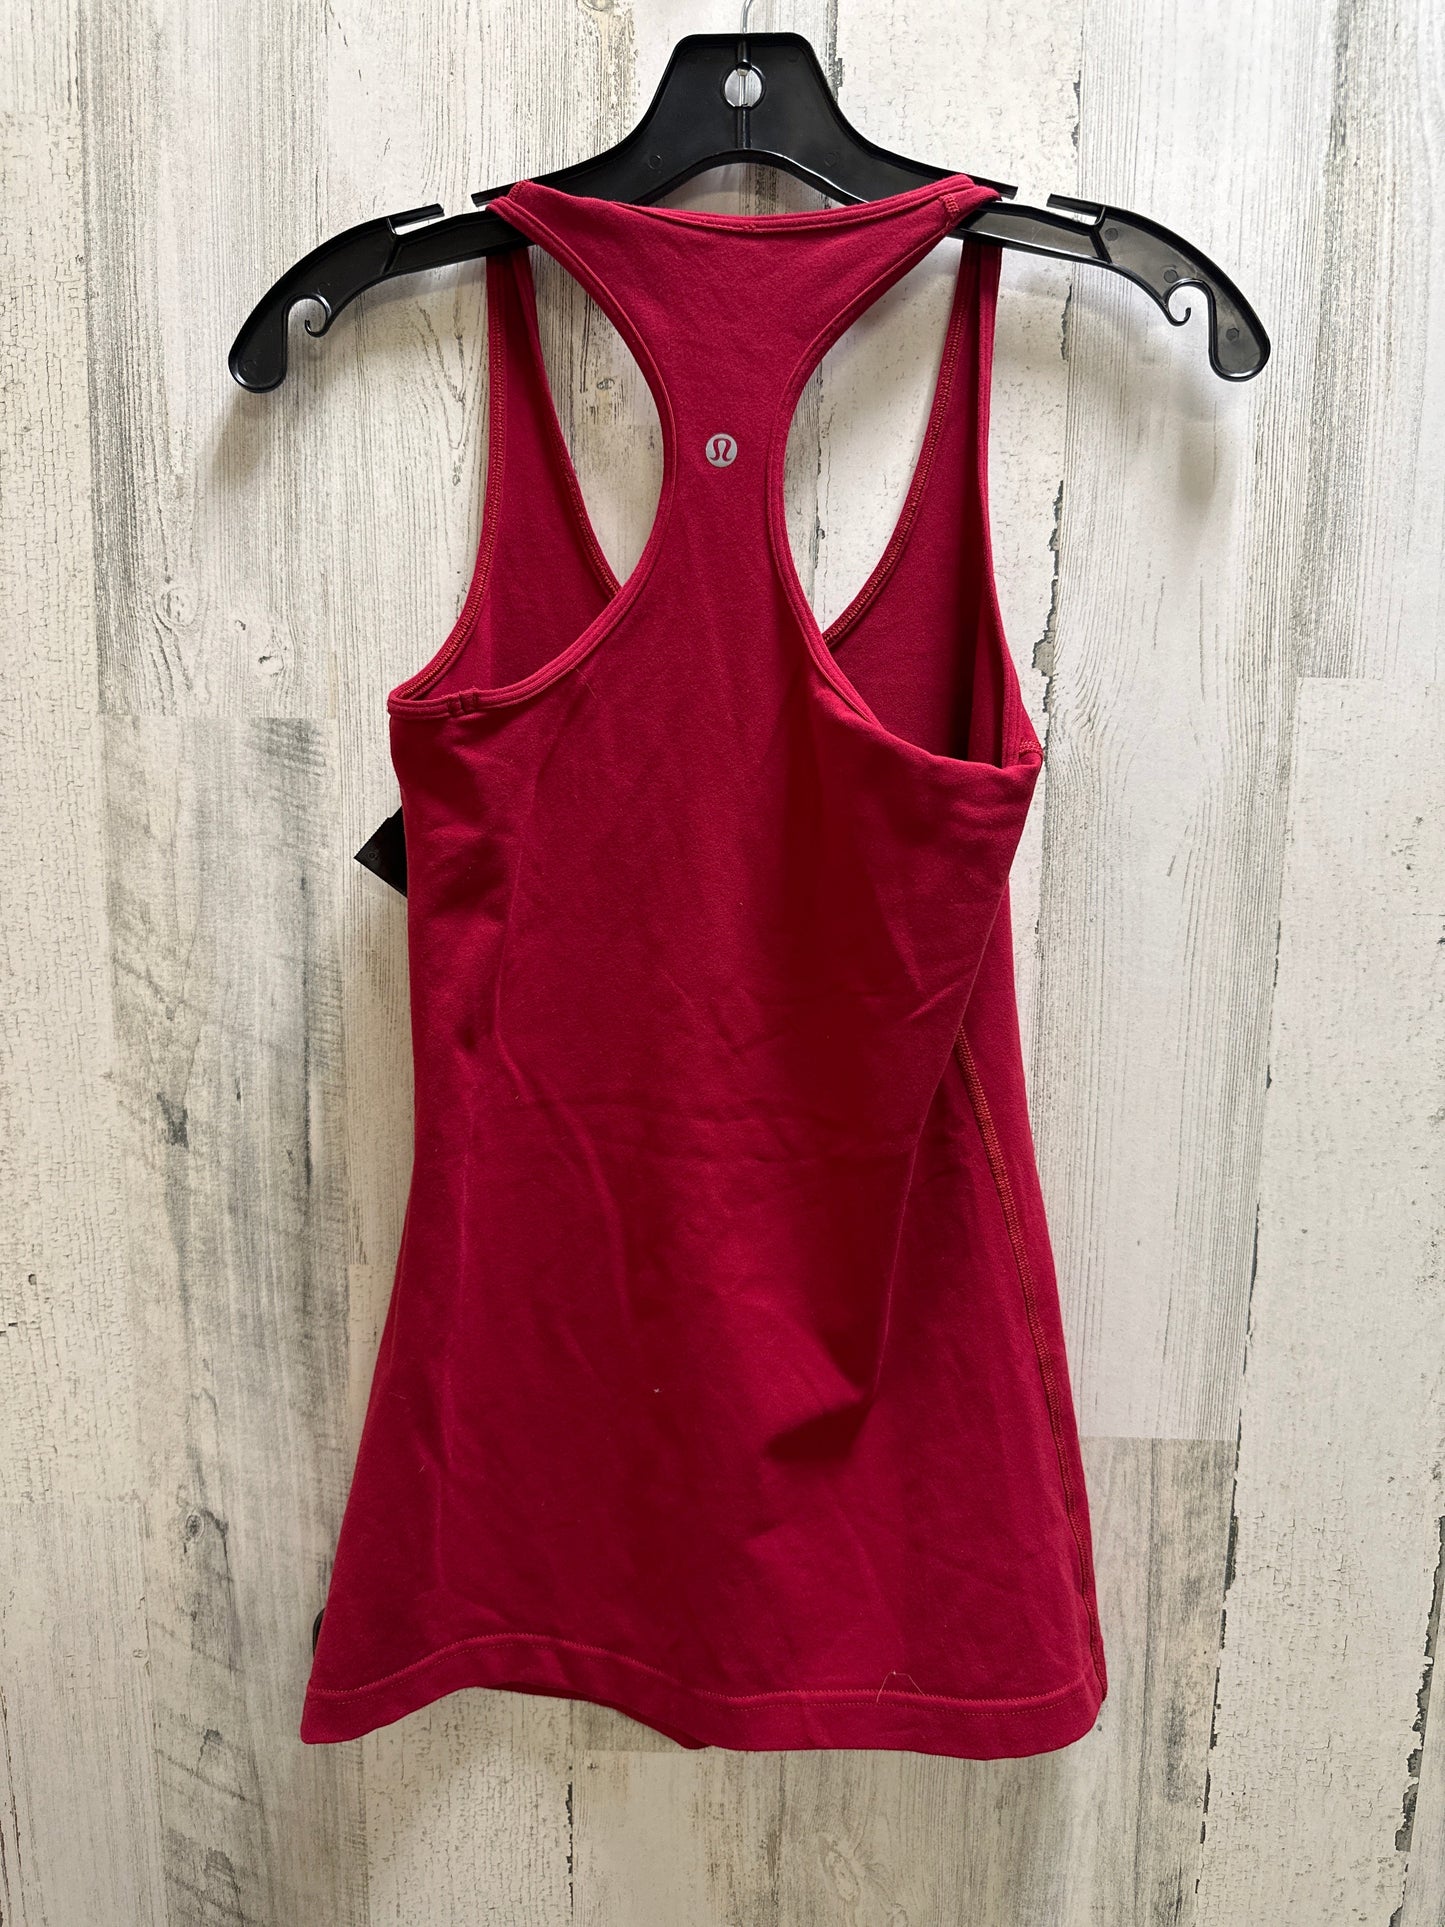 Red Athletic Tank Top Lululemon, Size Xs